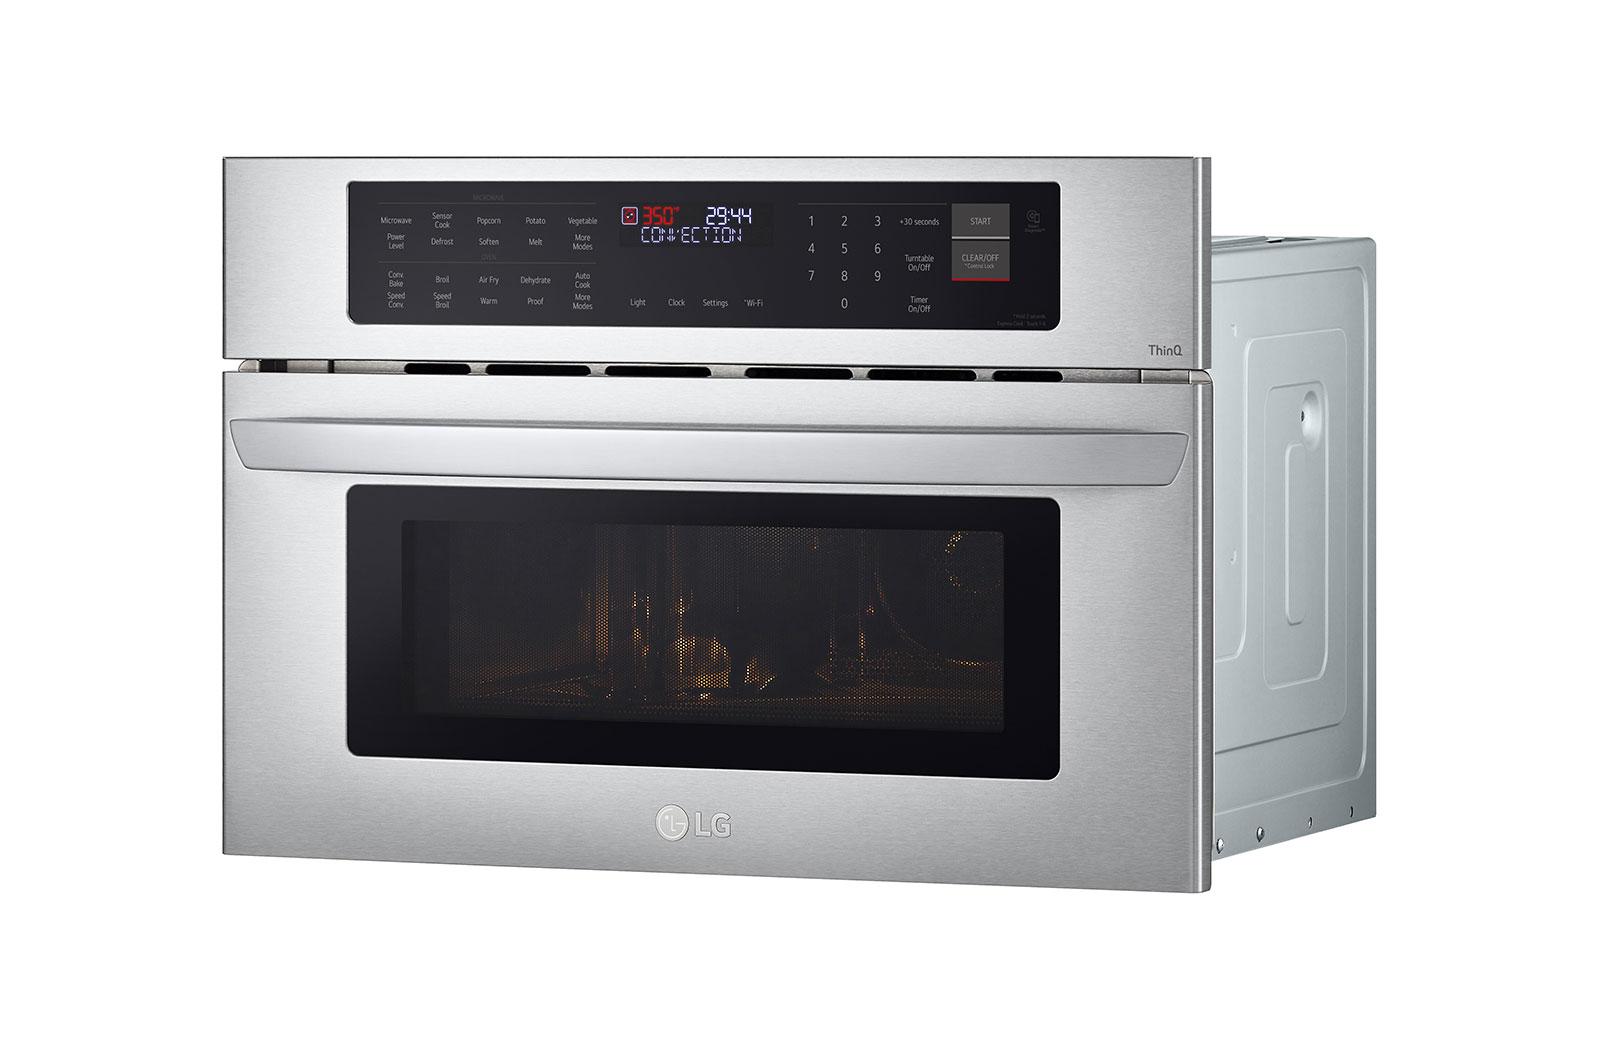 Lg 1.7 cu. ft. Smart Built-In Microwave Speed Oven